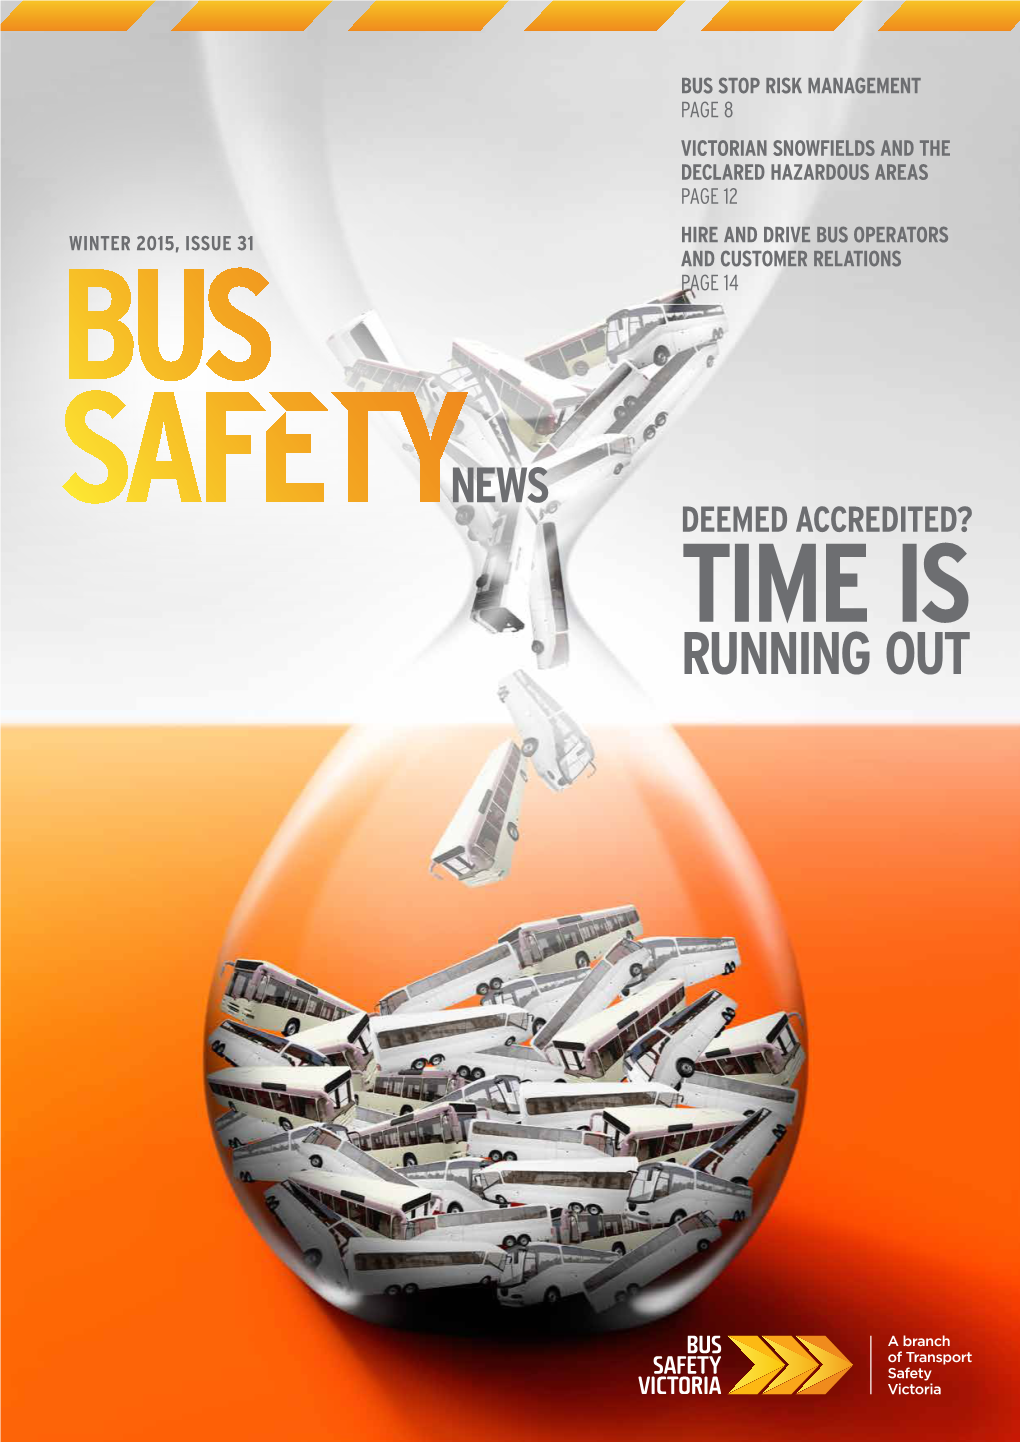 Bus Safety News >> 2 from the Director